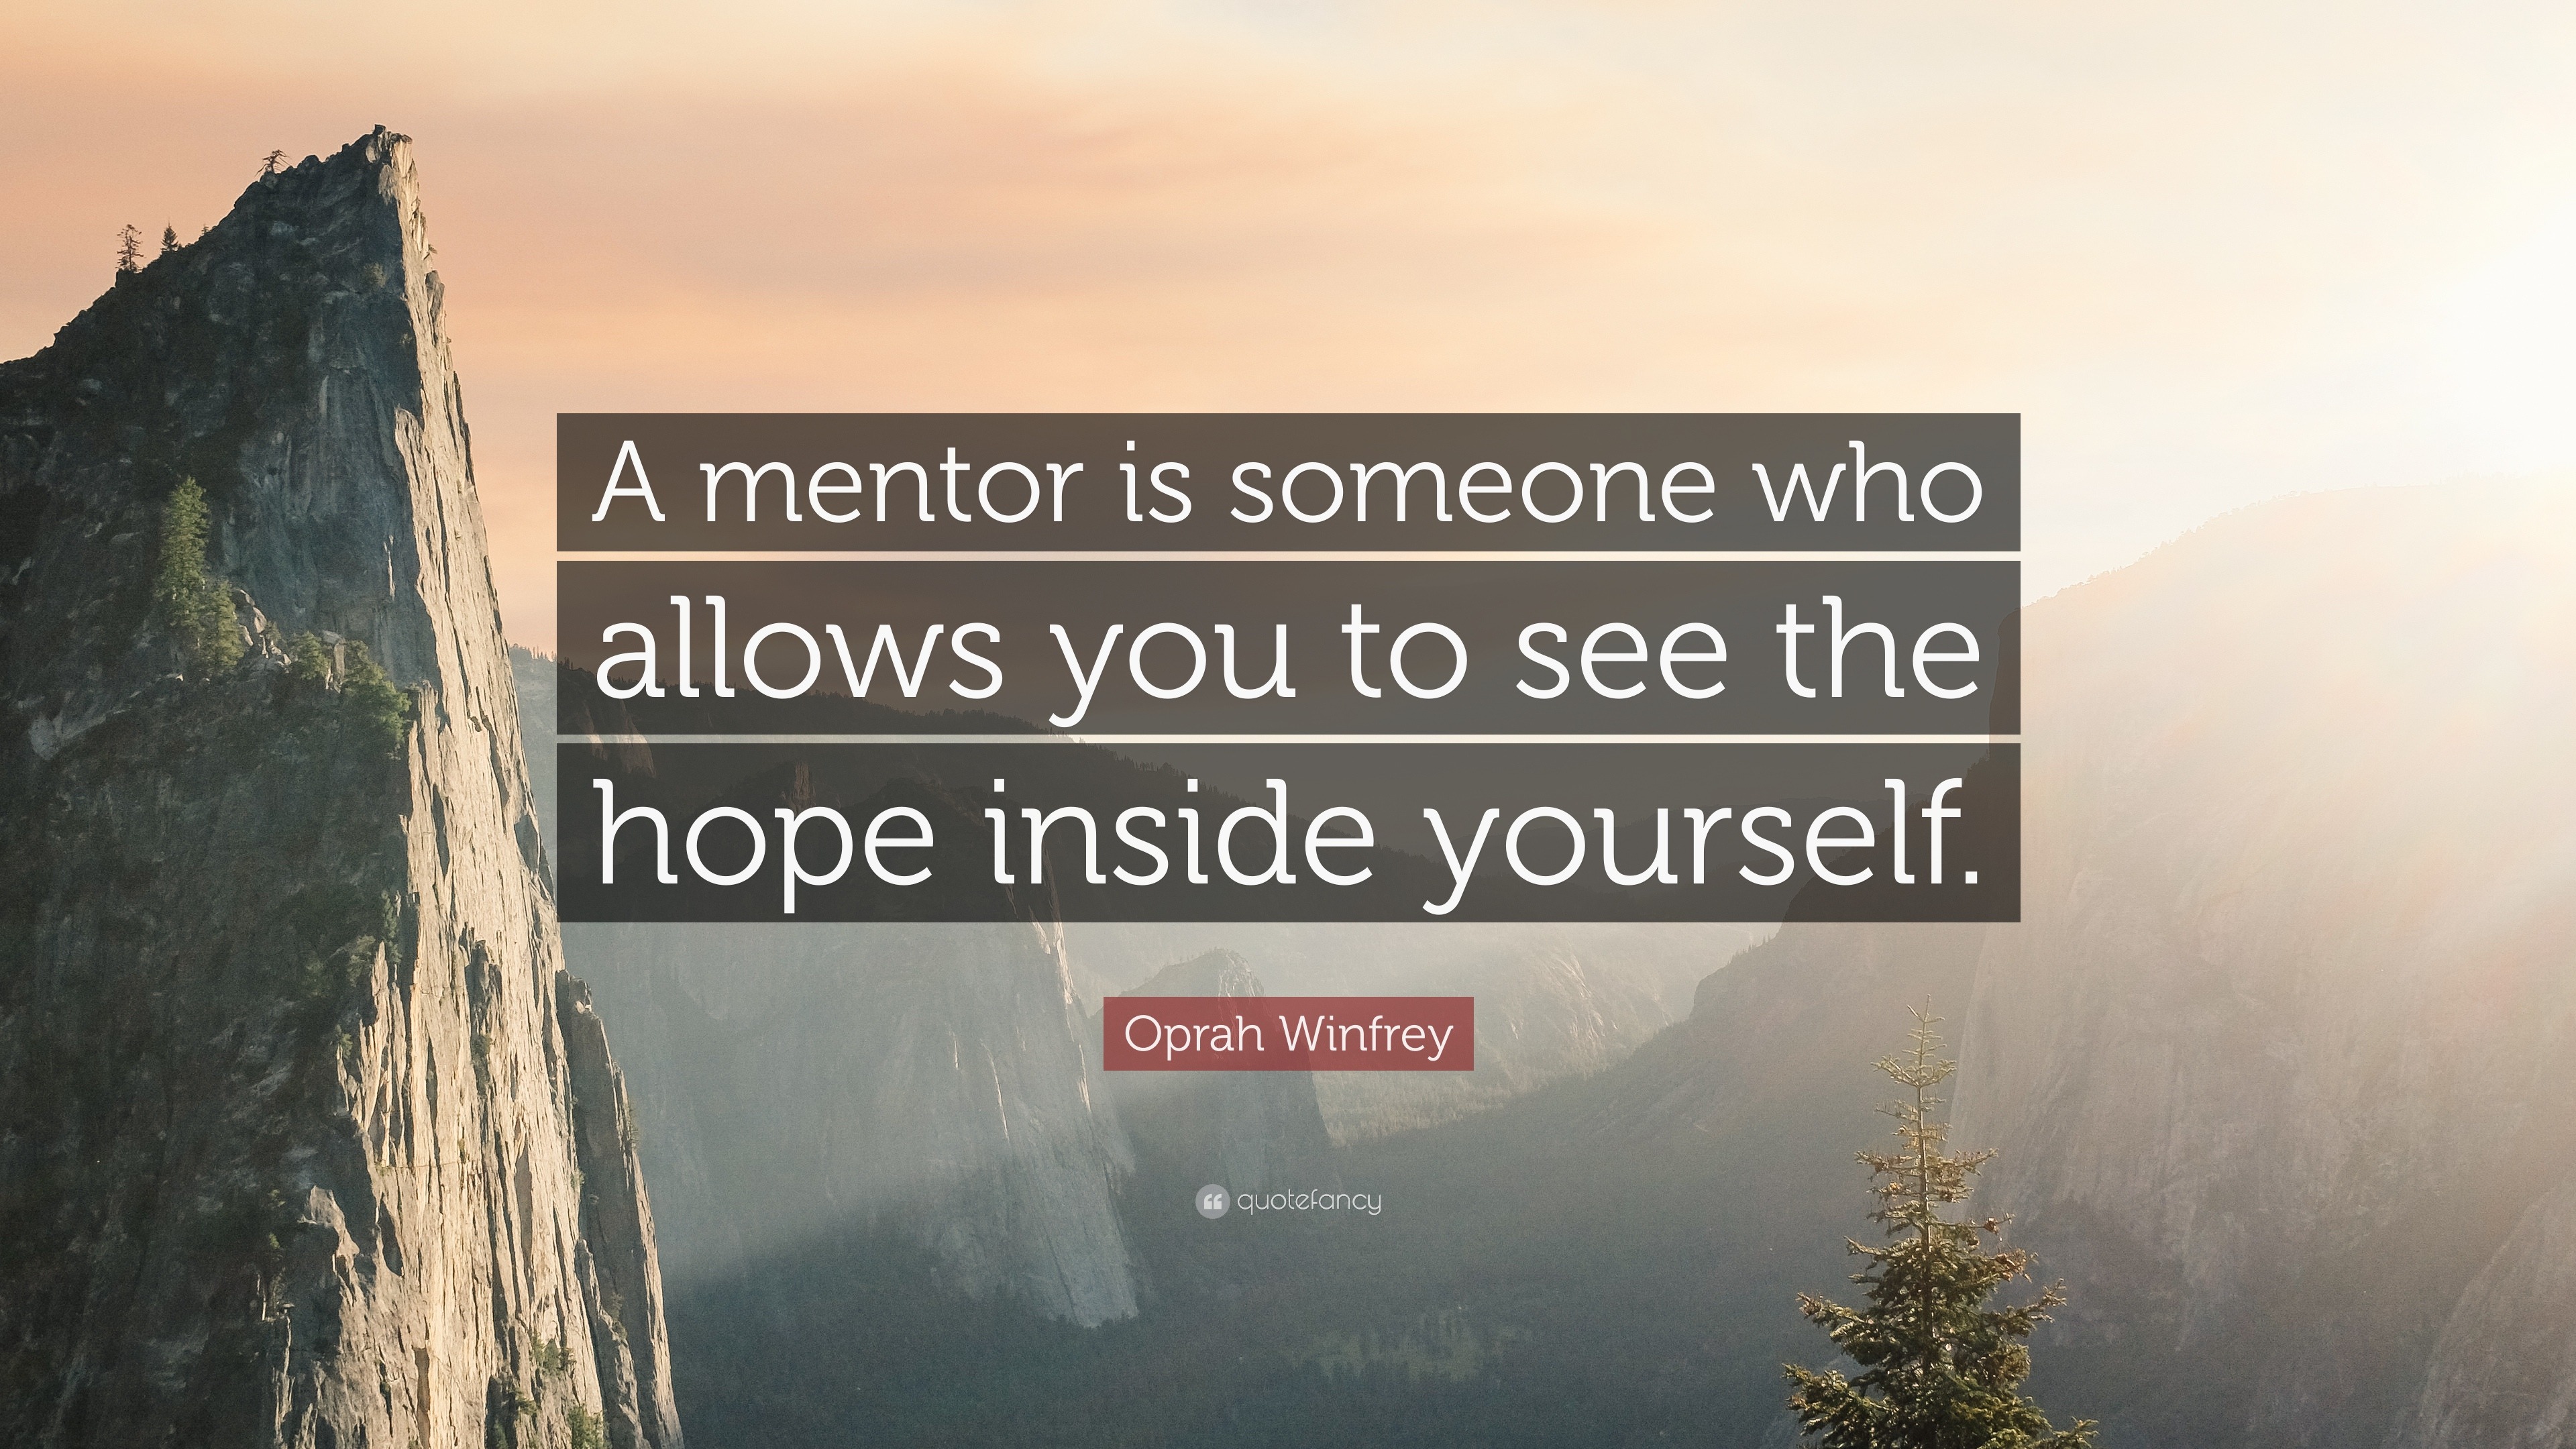 Motivational Quotes For Mentors - Best Quotes